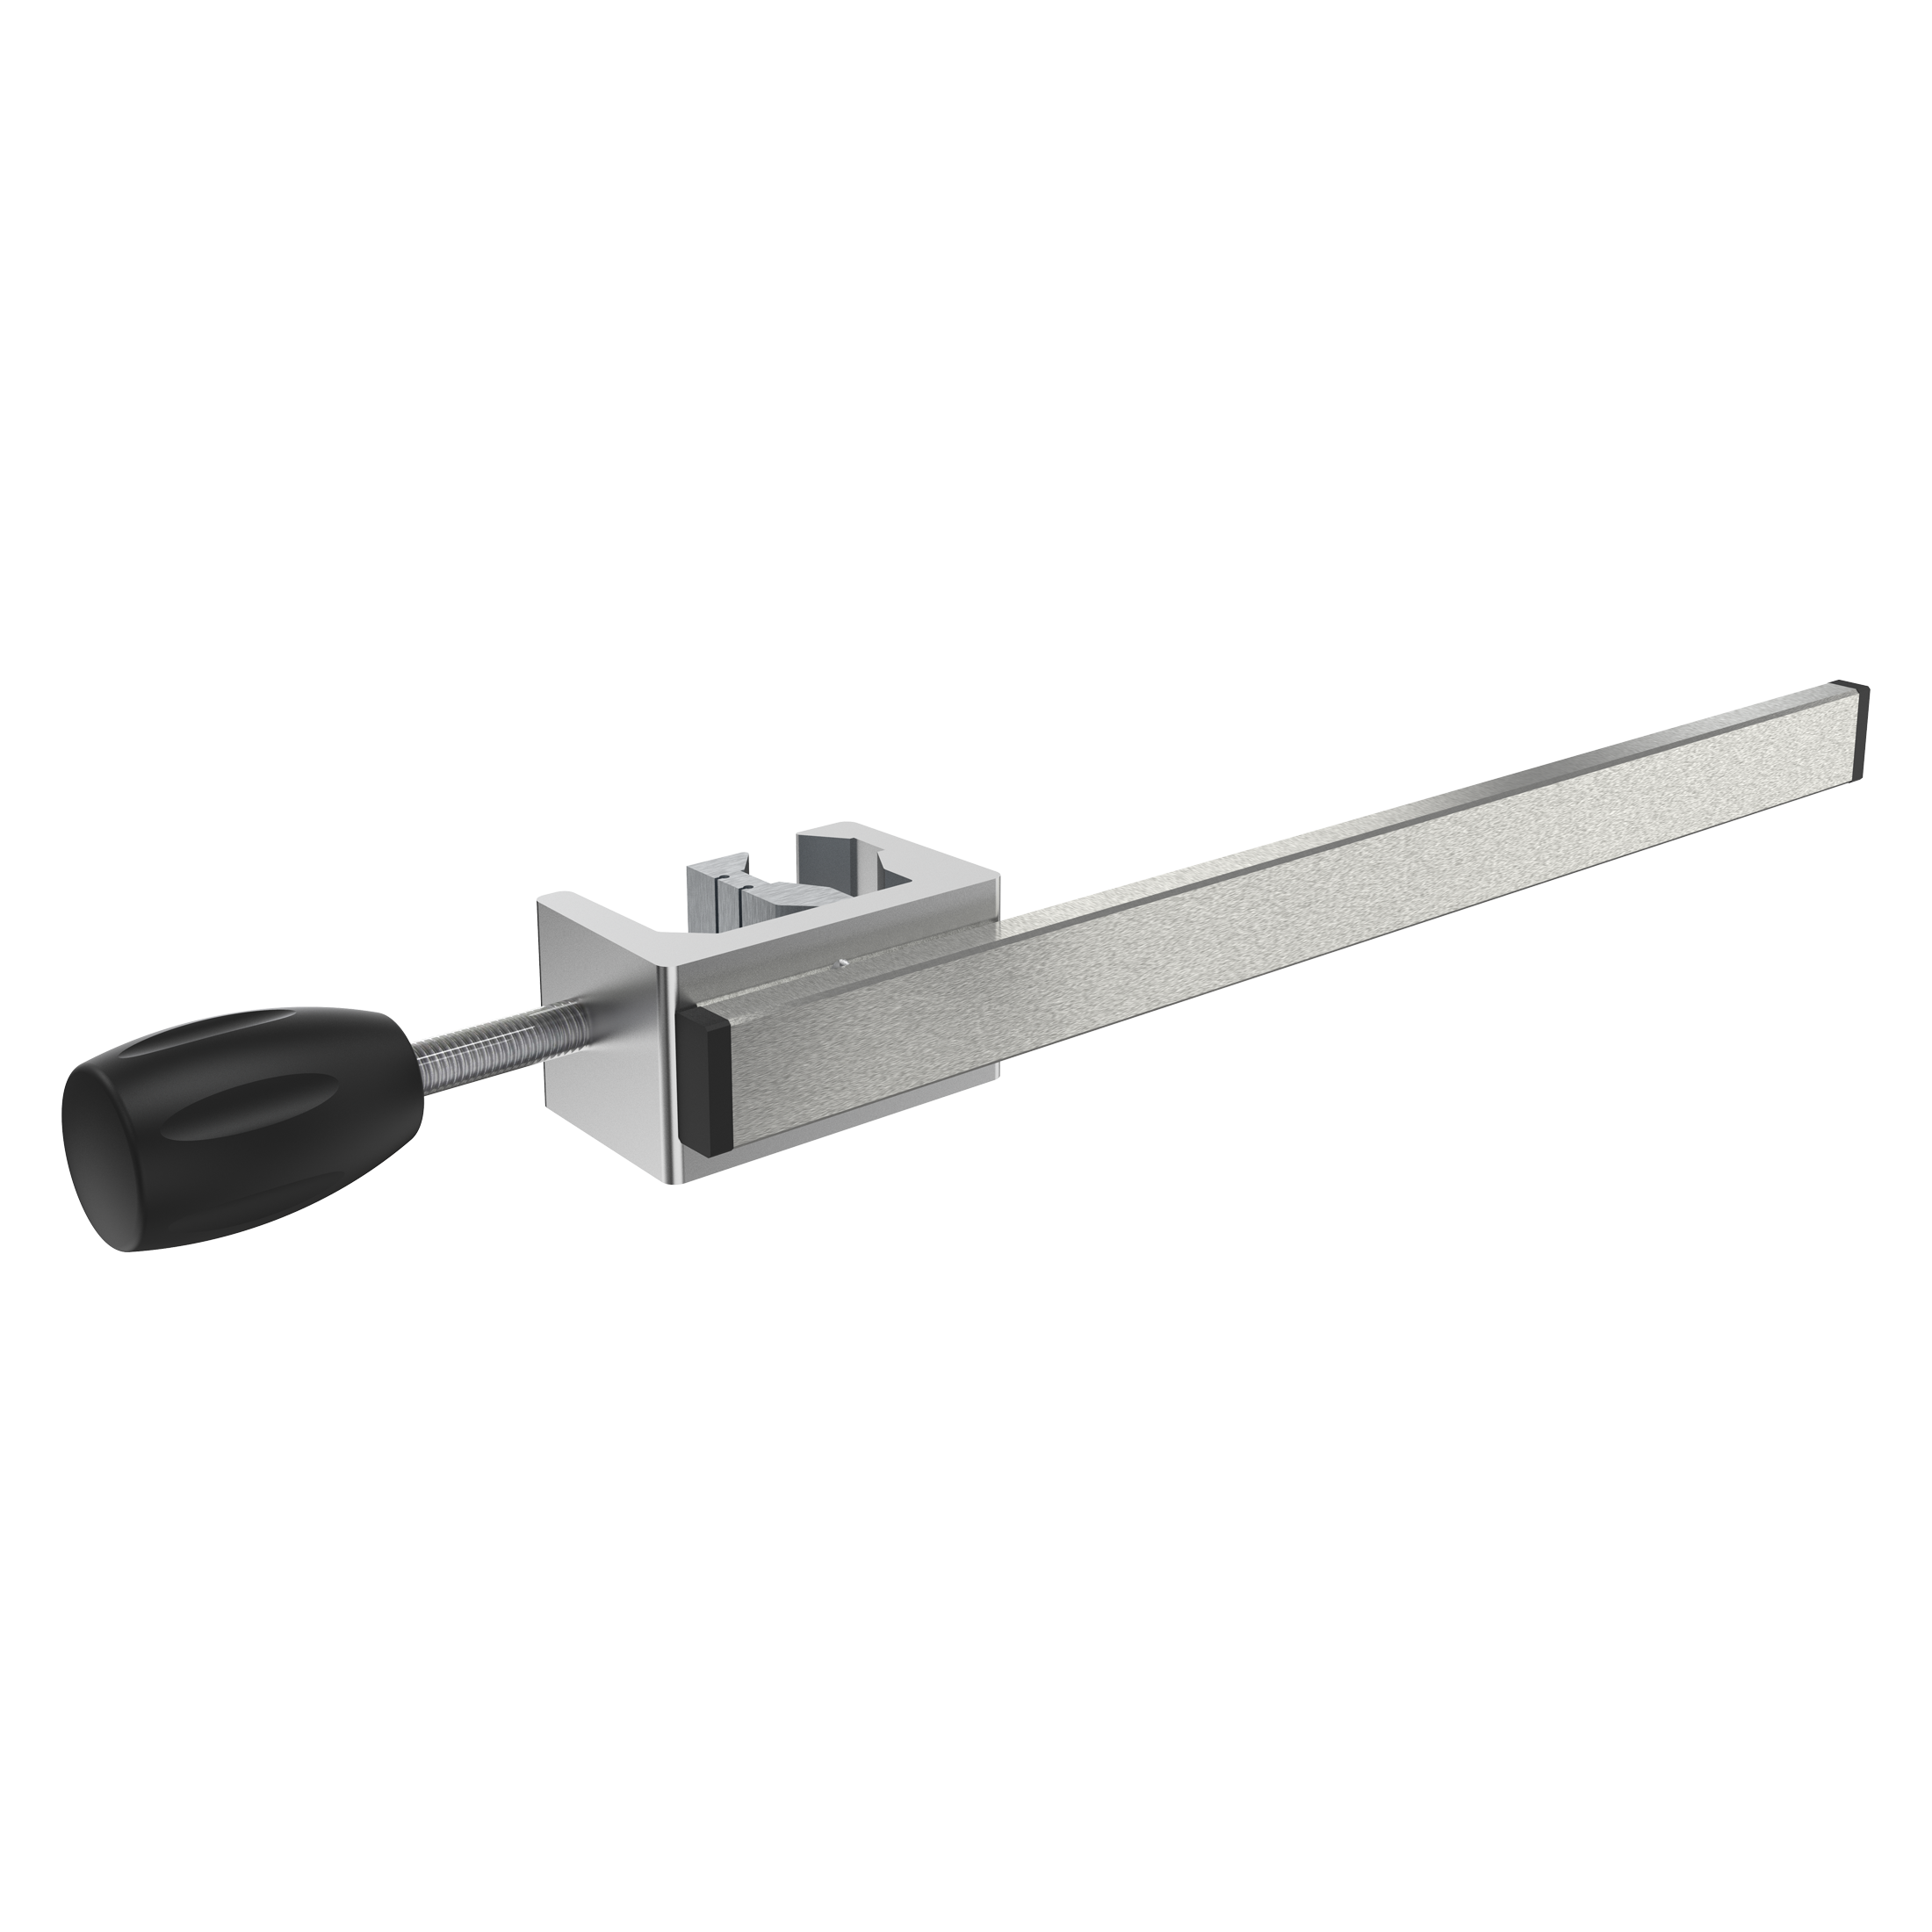 Standard rail with universal clamp